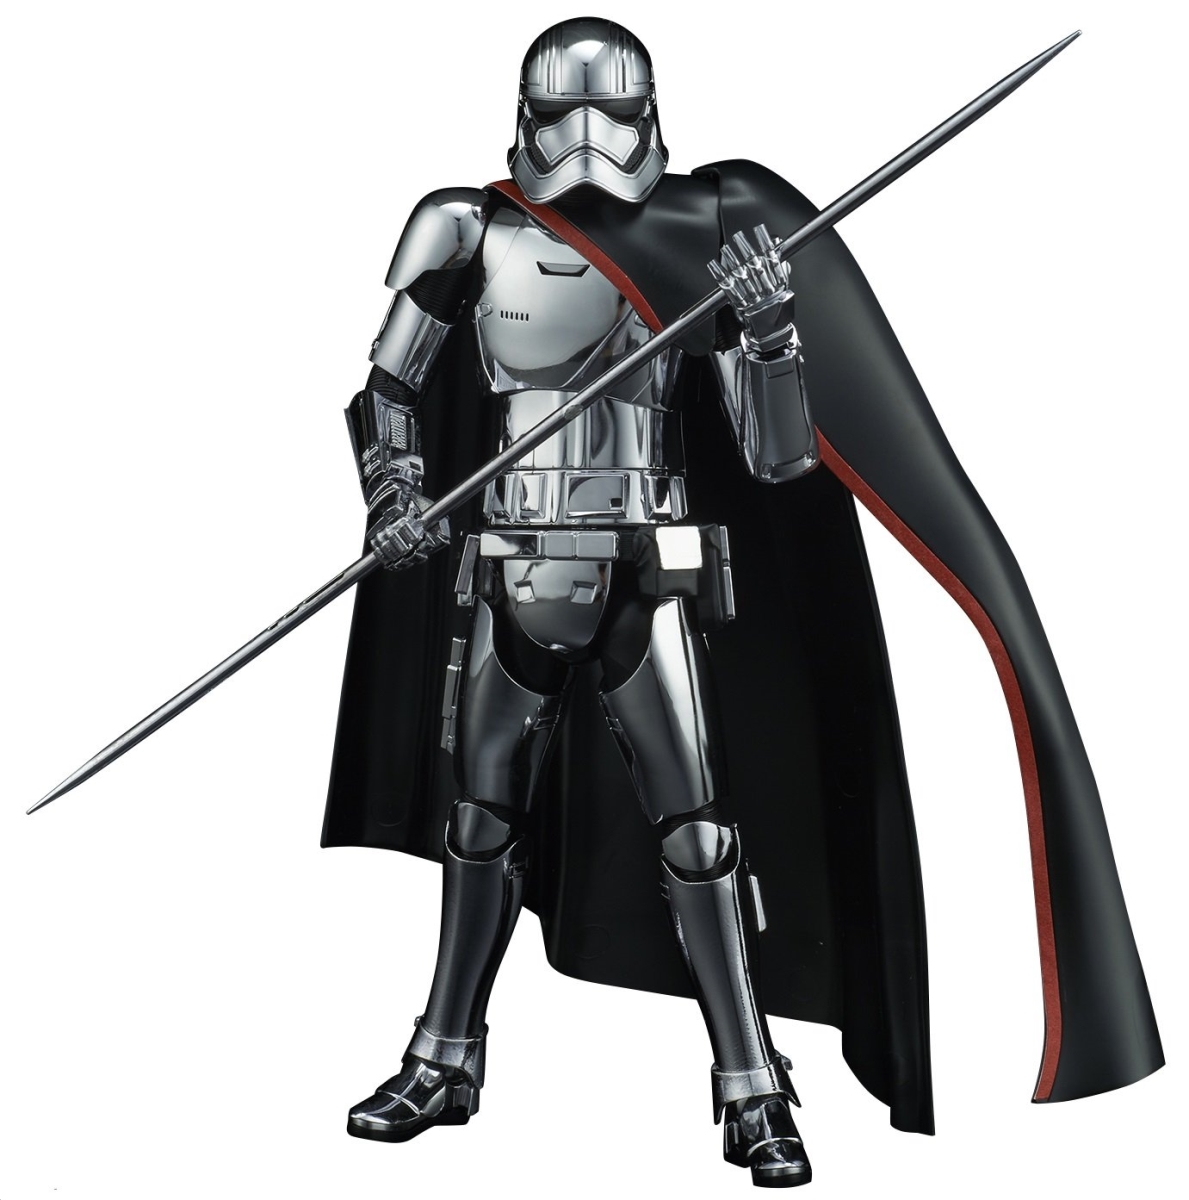 Ban219776 1 By 12 Scale Captain Phasma Plastic Model Kit From Star Wars Character Line